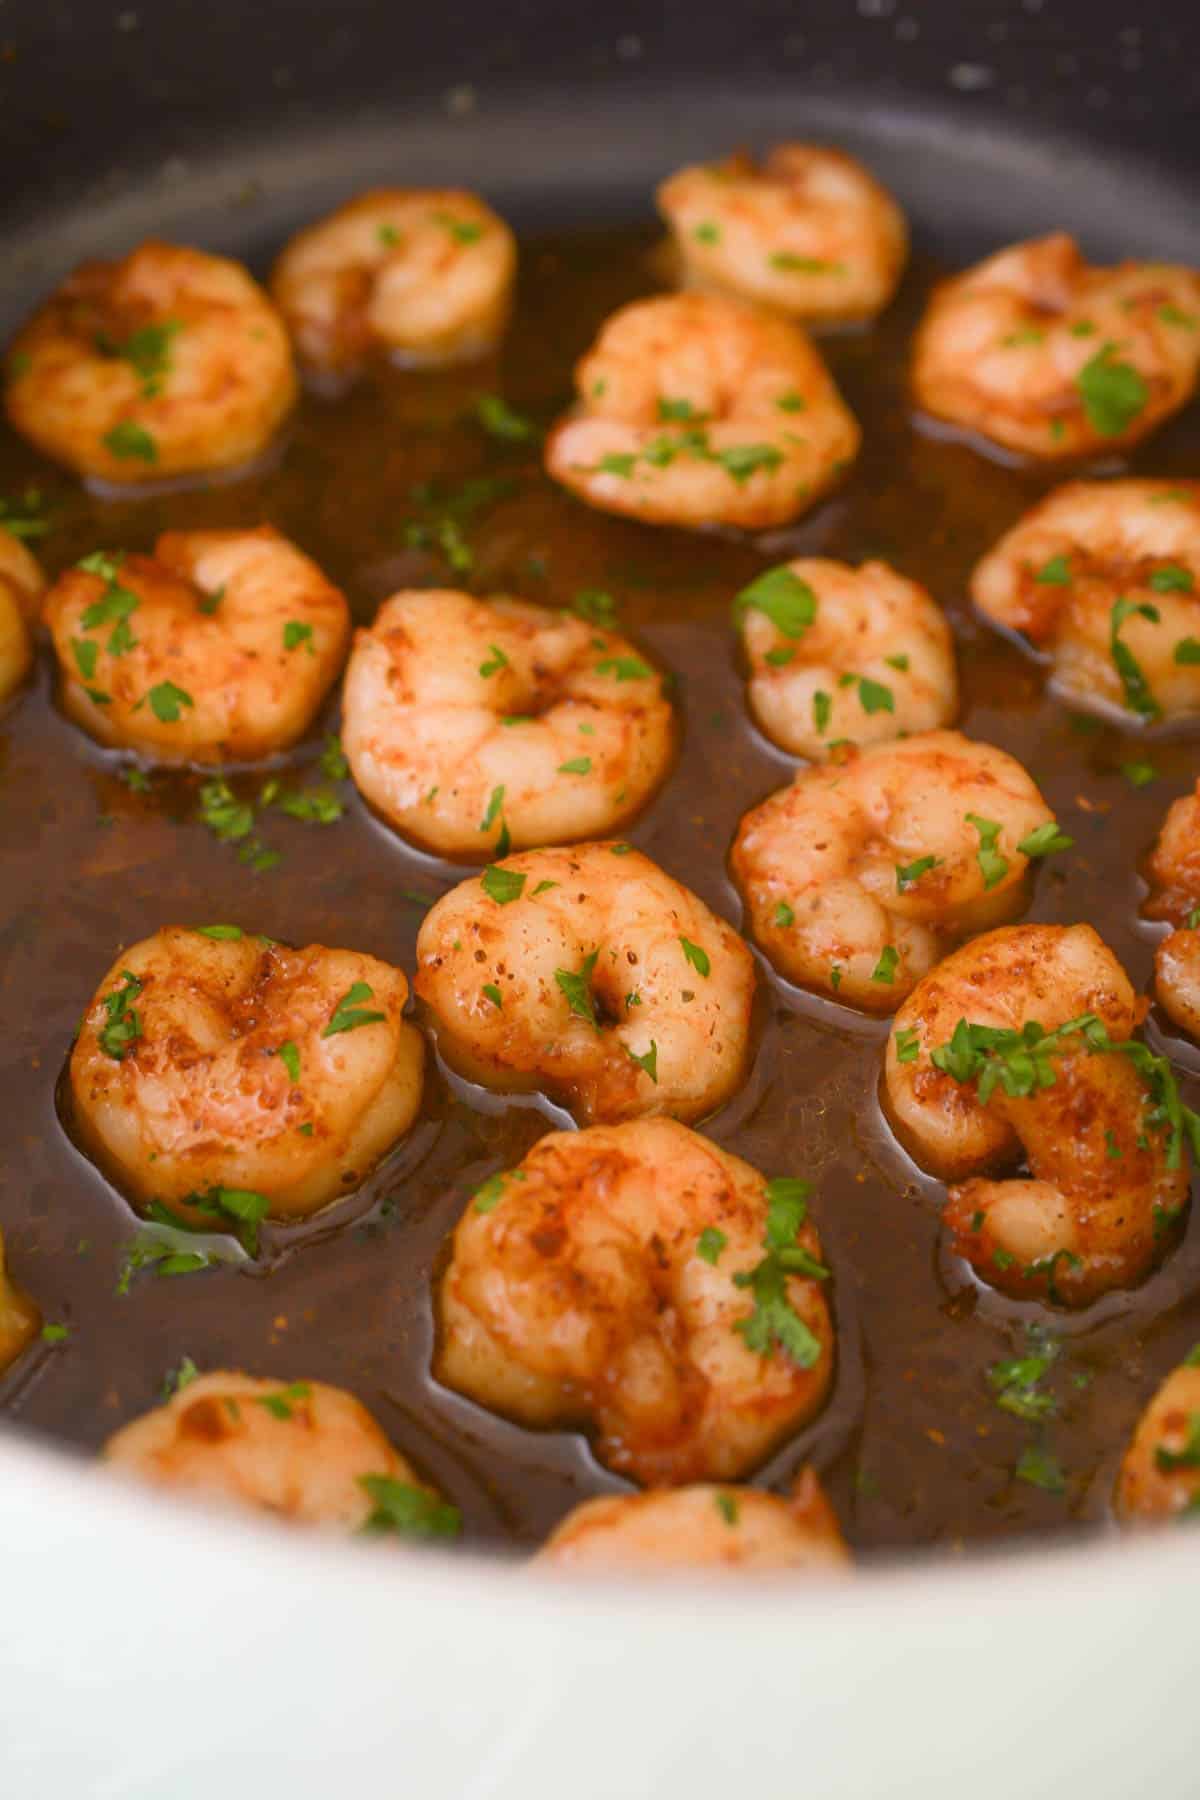 Honey Butter Old Bay Shrimp: A Delicious Seafood Recipe